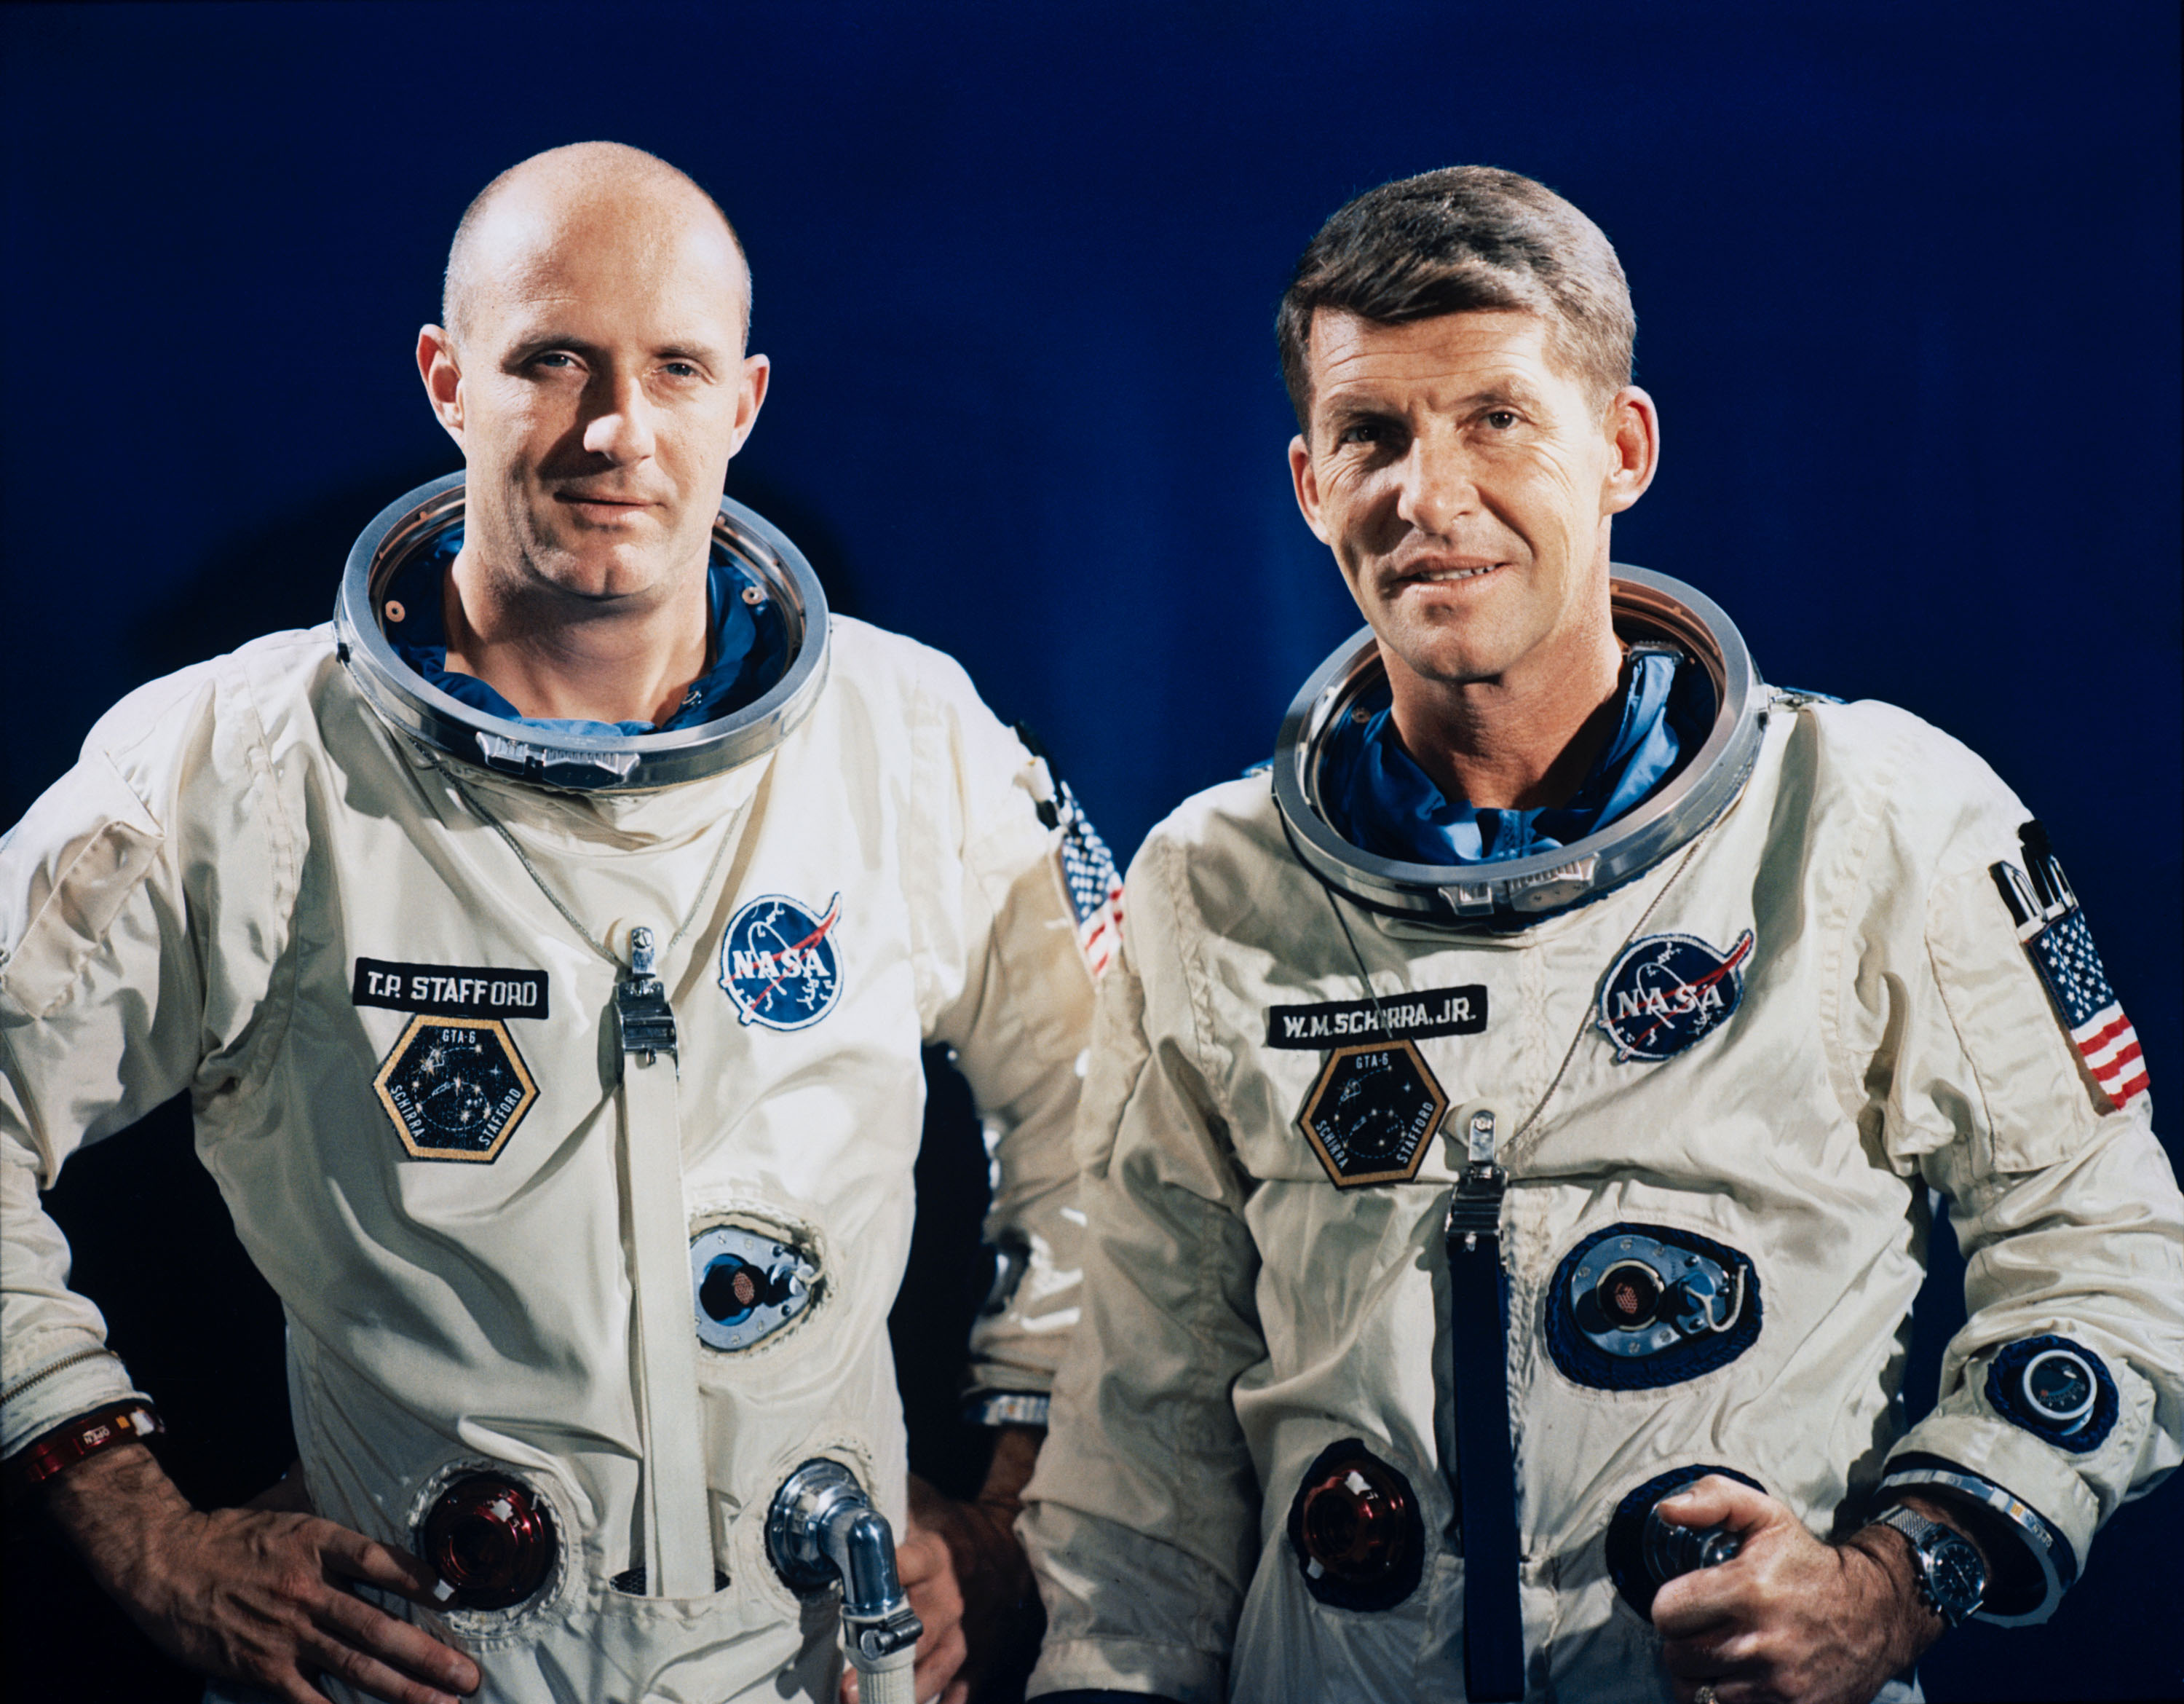 Two male astronauts, Thomas P. Stafford (left) and Walter M. Schirra Jr., look directly into the camera. They are wearing white spacesuits with multiple patches including their names, mission, NASA, and the American flag. Behind them is a deep blue backdrop.